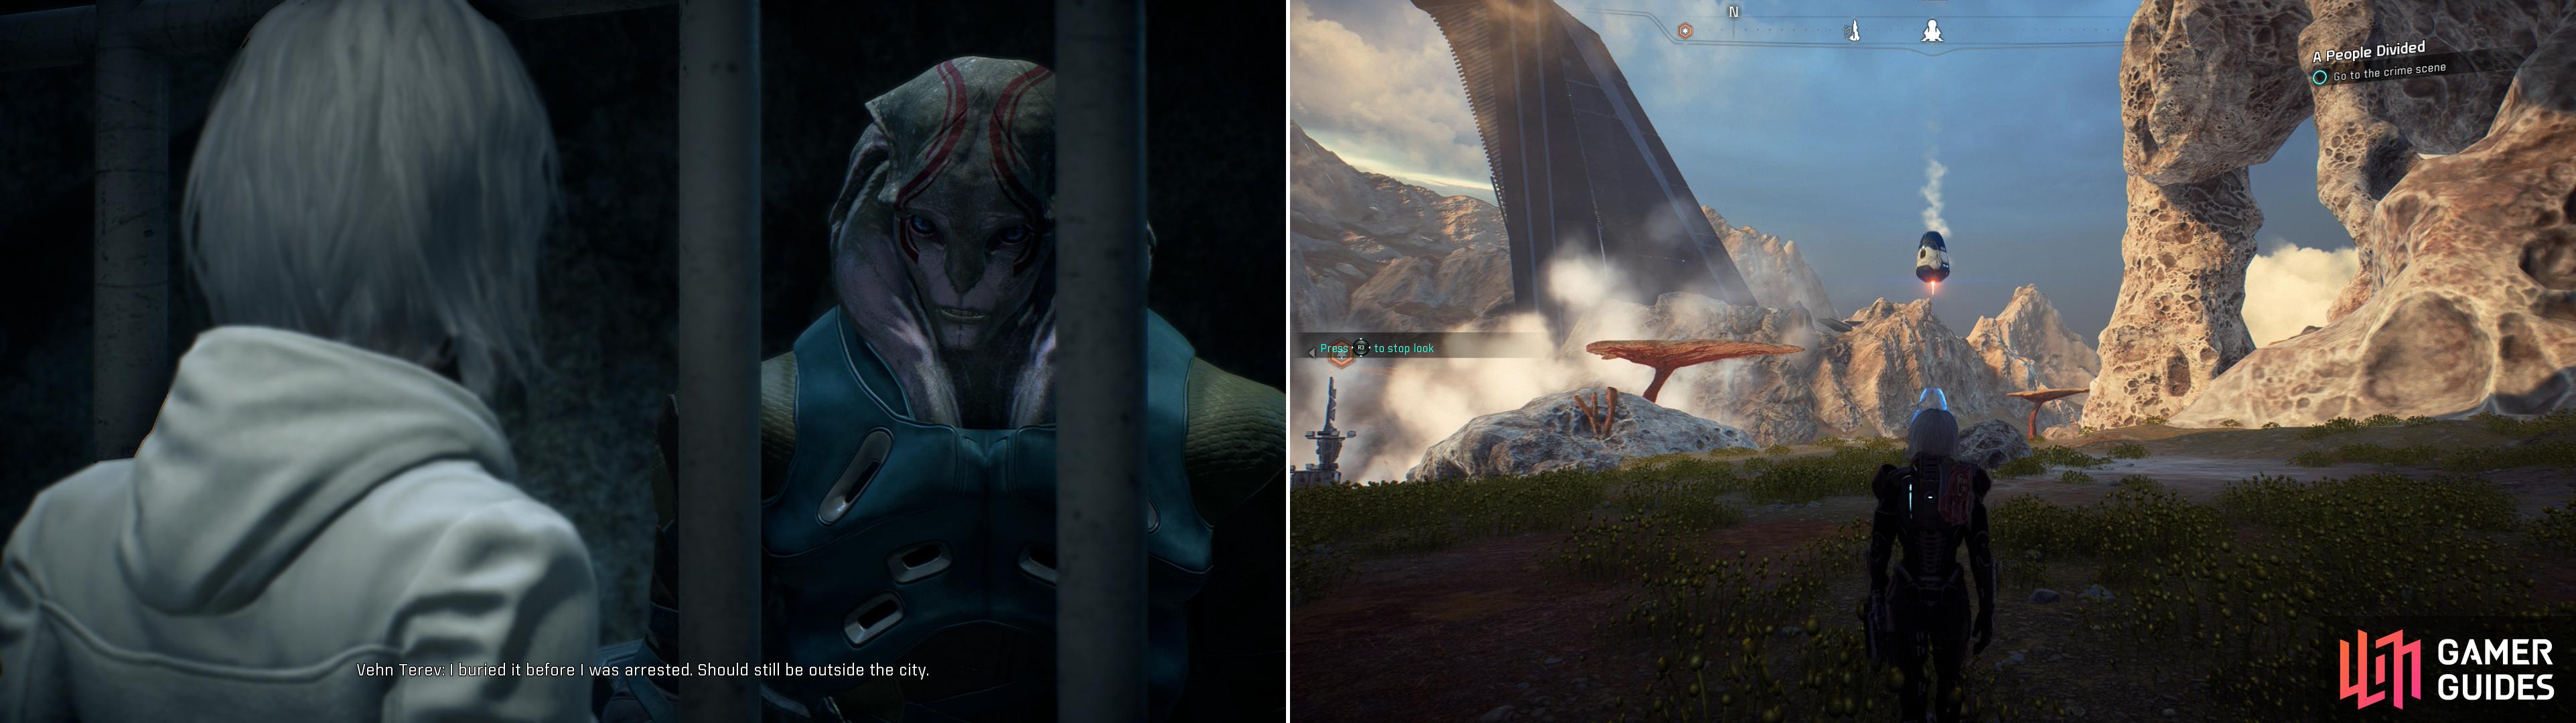 However you got there, talk to Vehn Terev to learn where you can find the info you need (left), which will require you to venture into the badlands of Kadara (right).